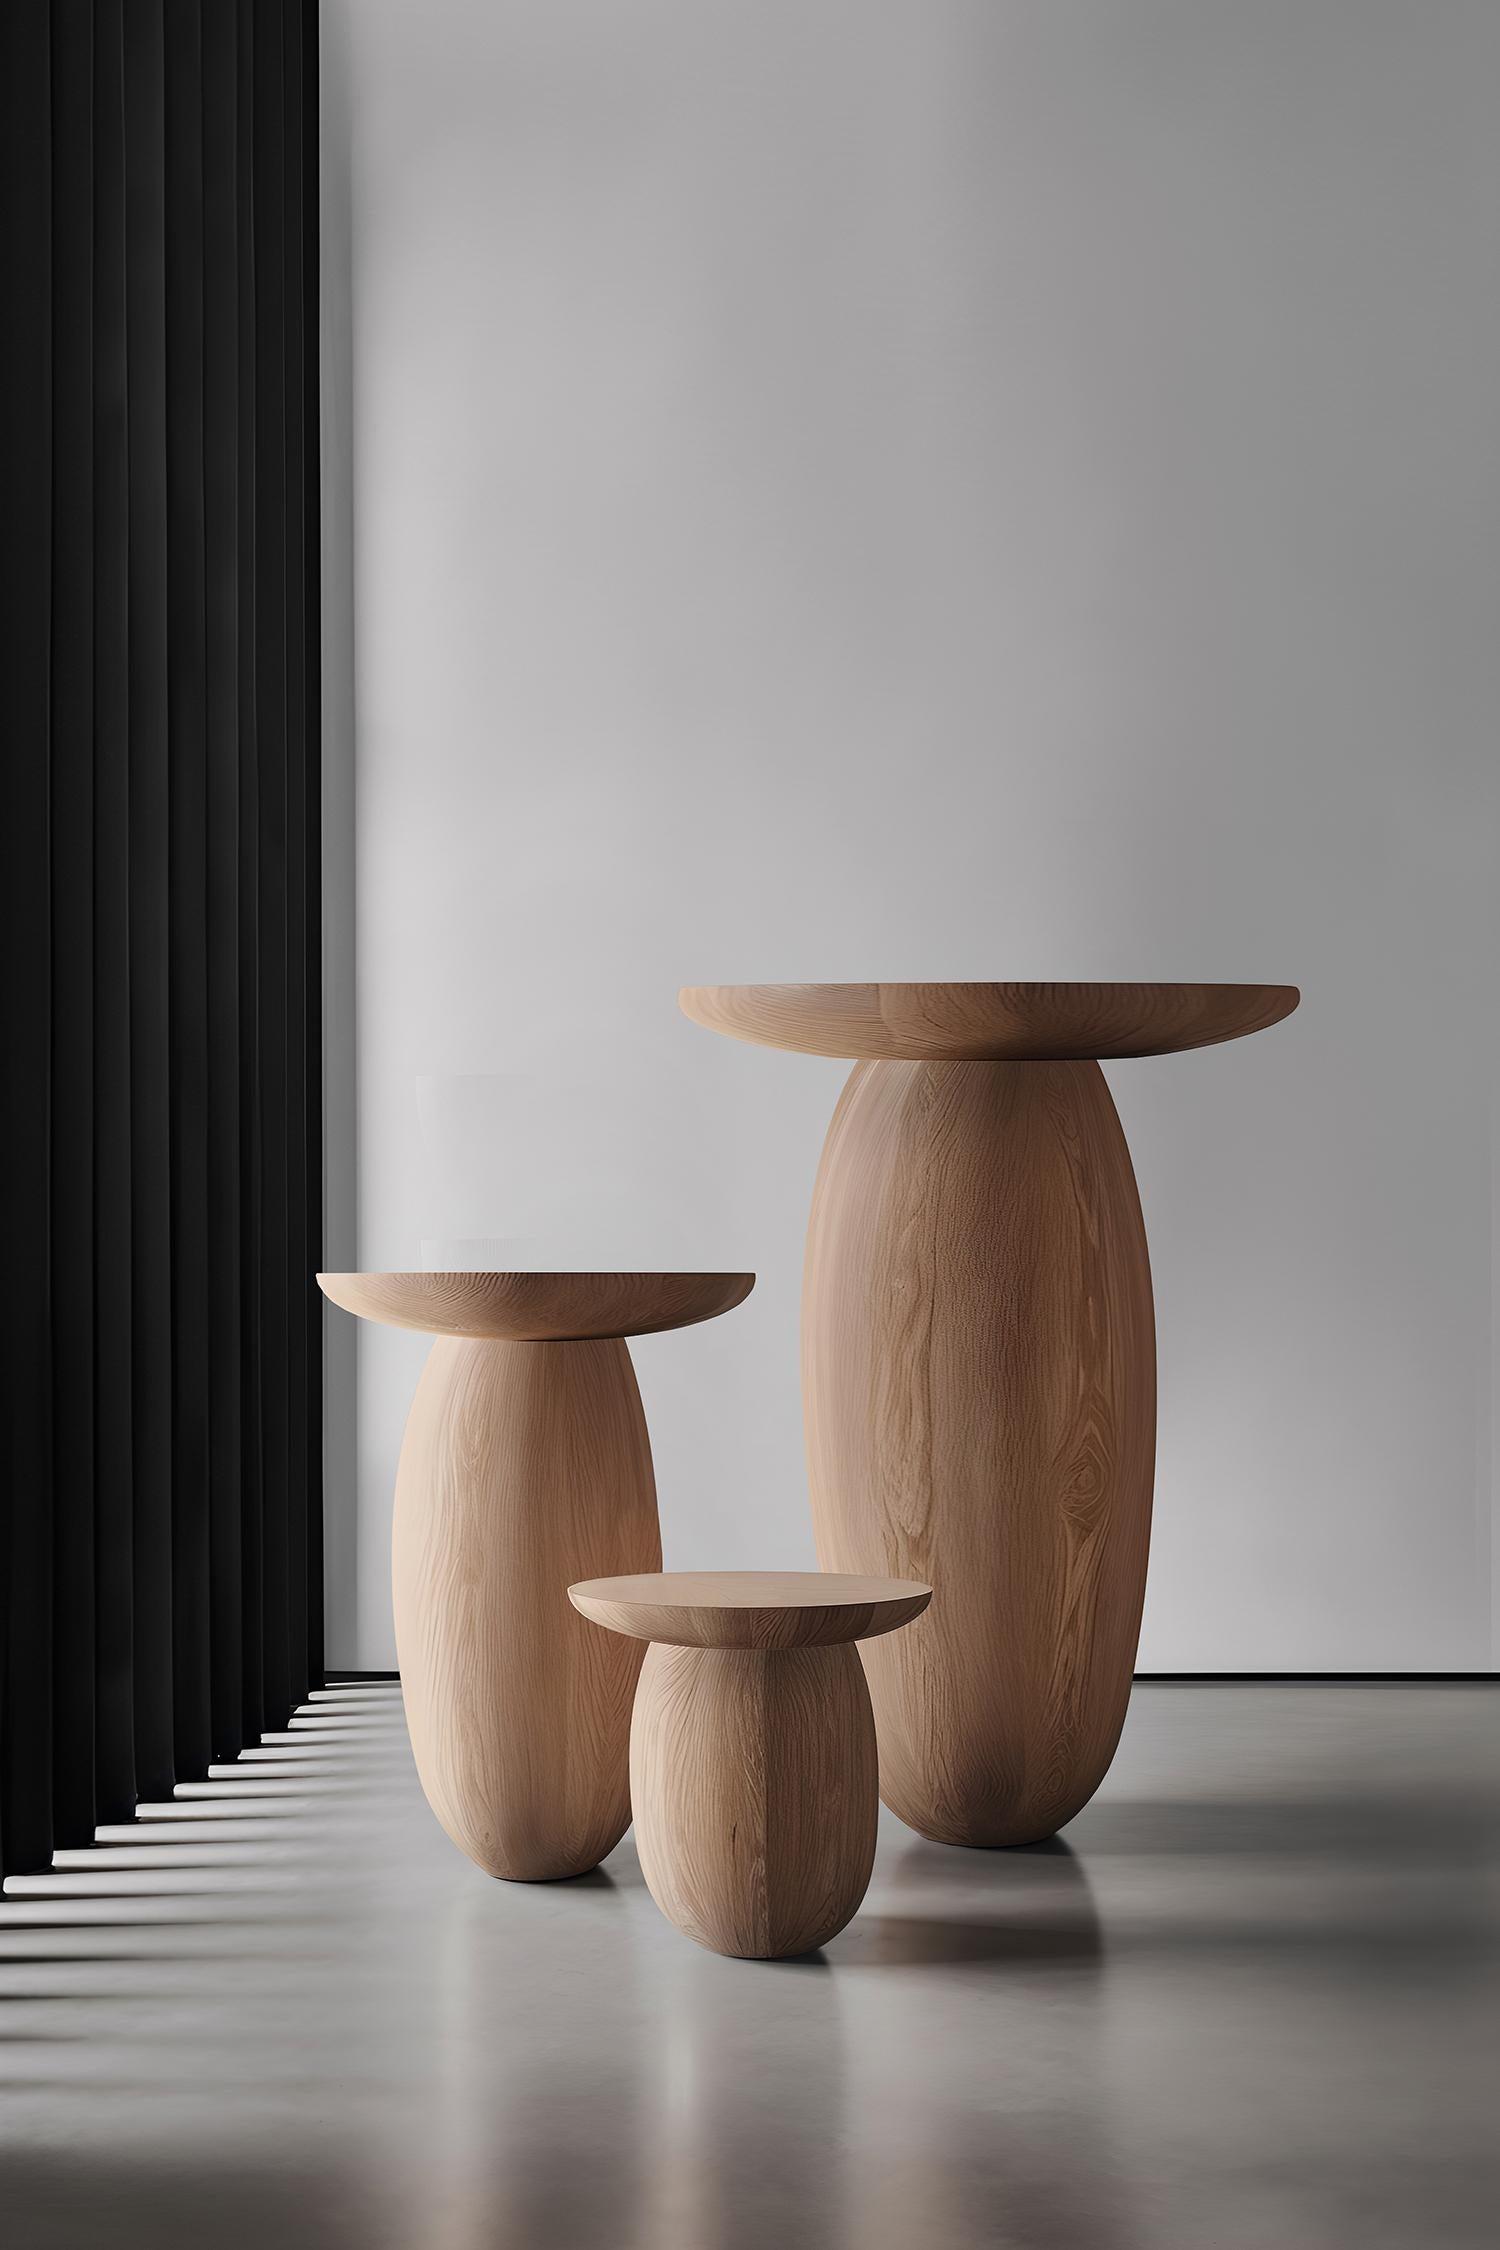 Contemporary Set of 3 Small Tables, Side Tables, End Tables Samu Made of Solid Wood by Nono For Sale